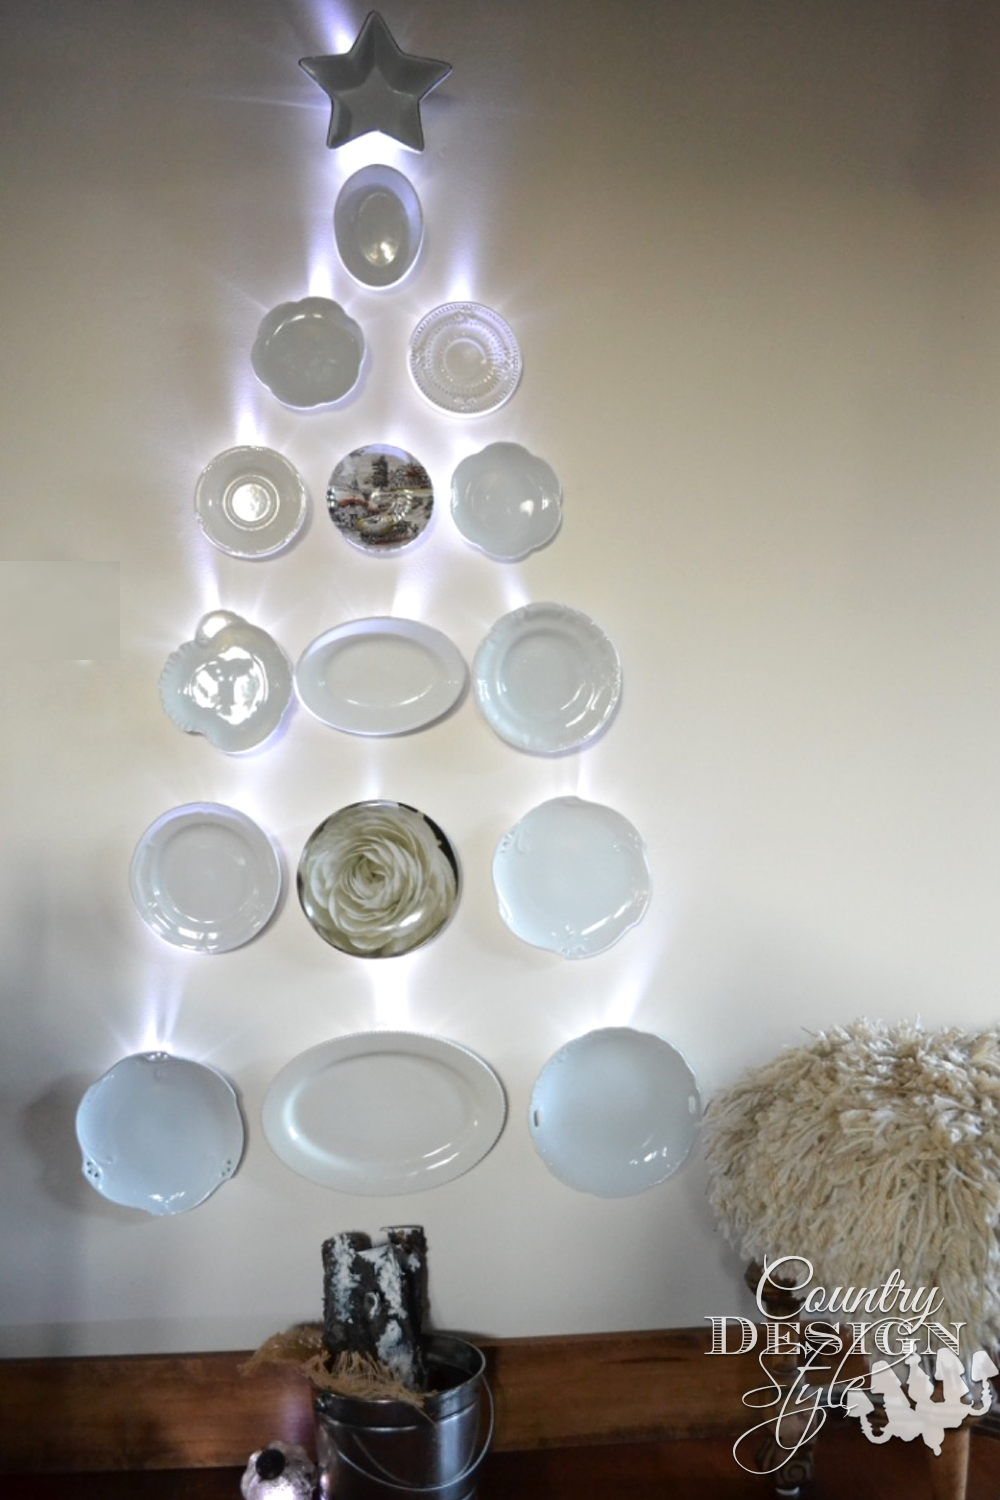 Dish Christmas Tree | Country Design Style | countrydesignstyle.com